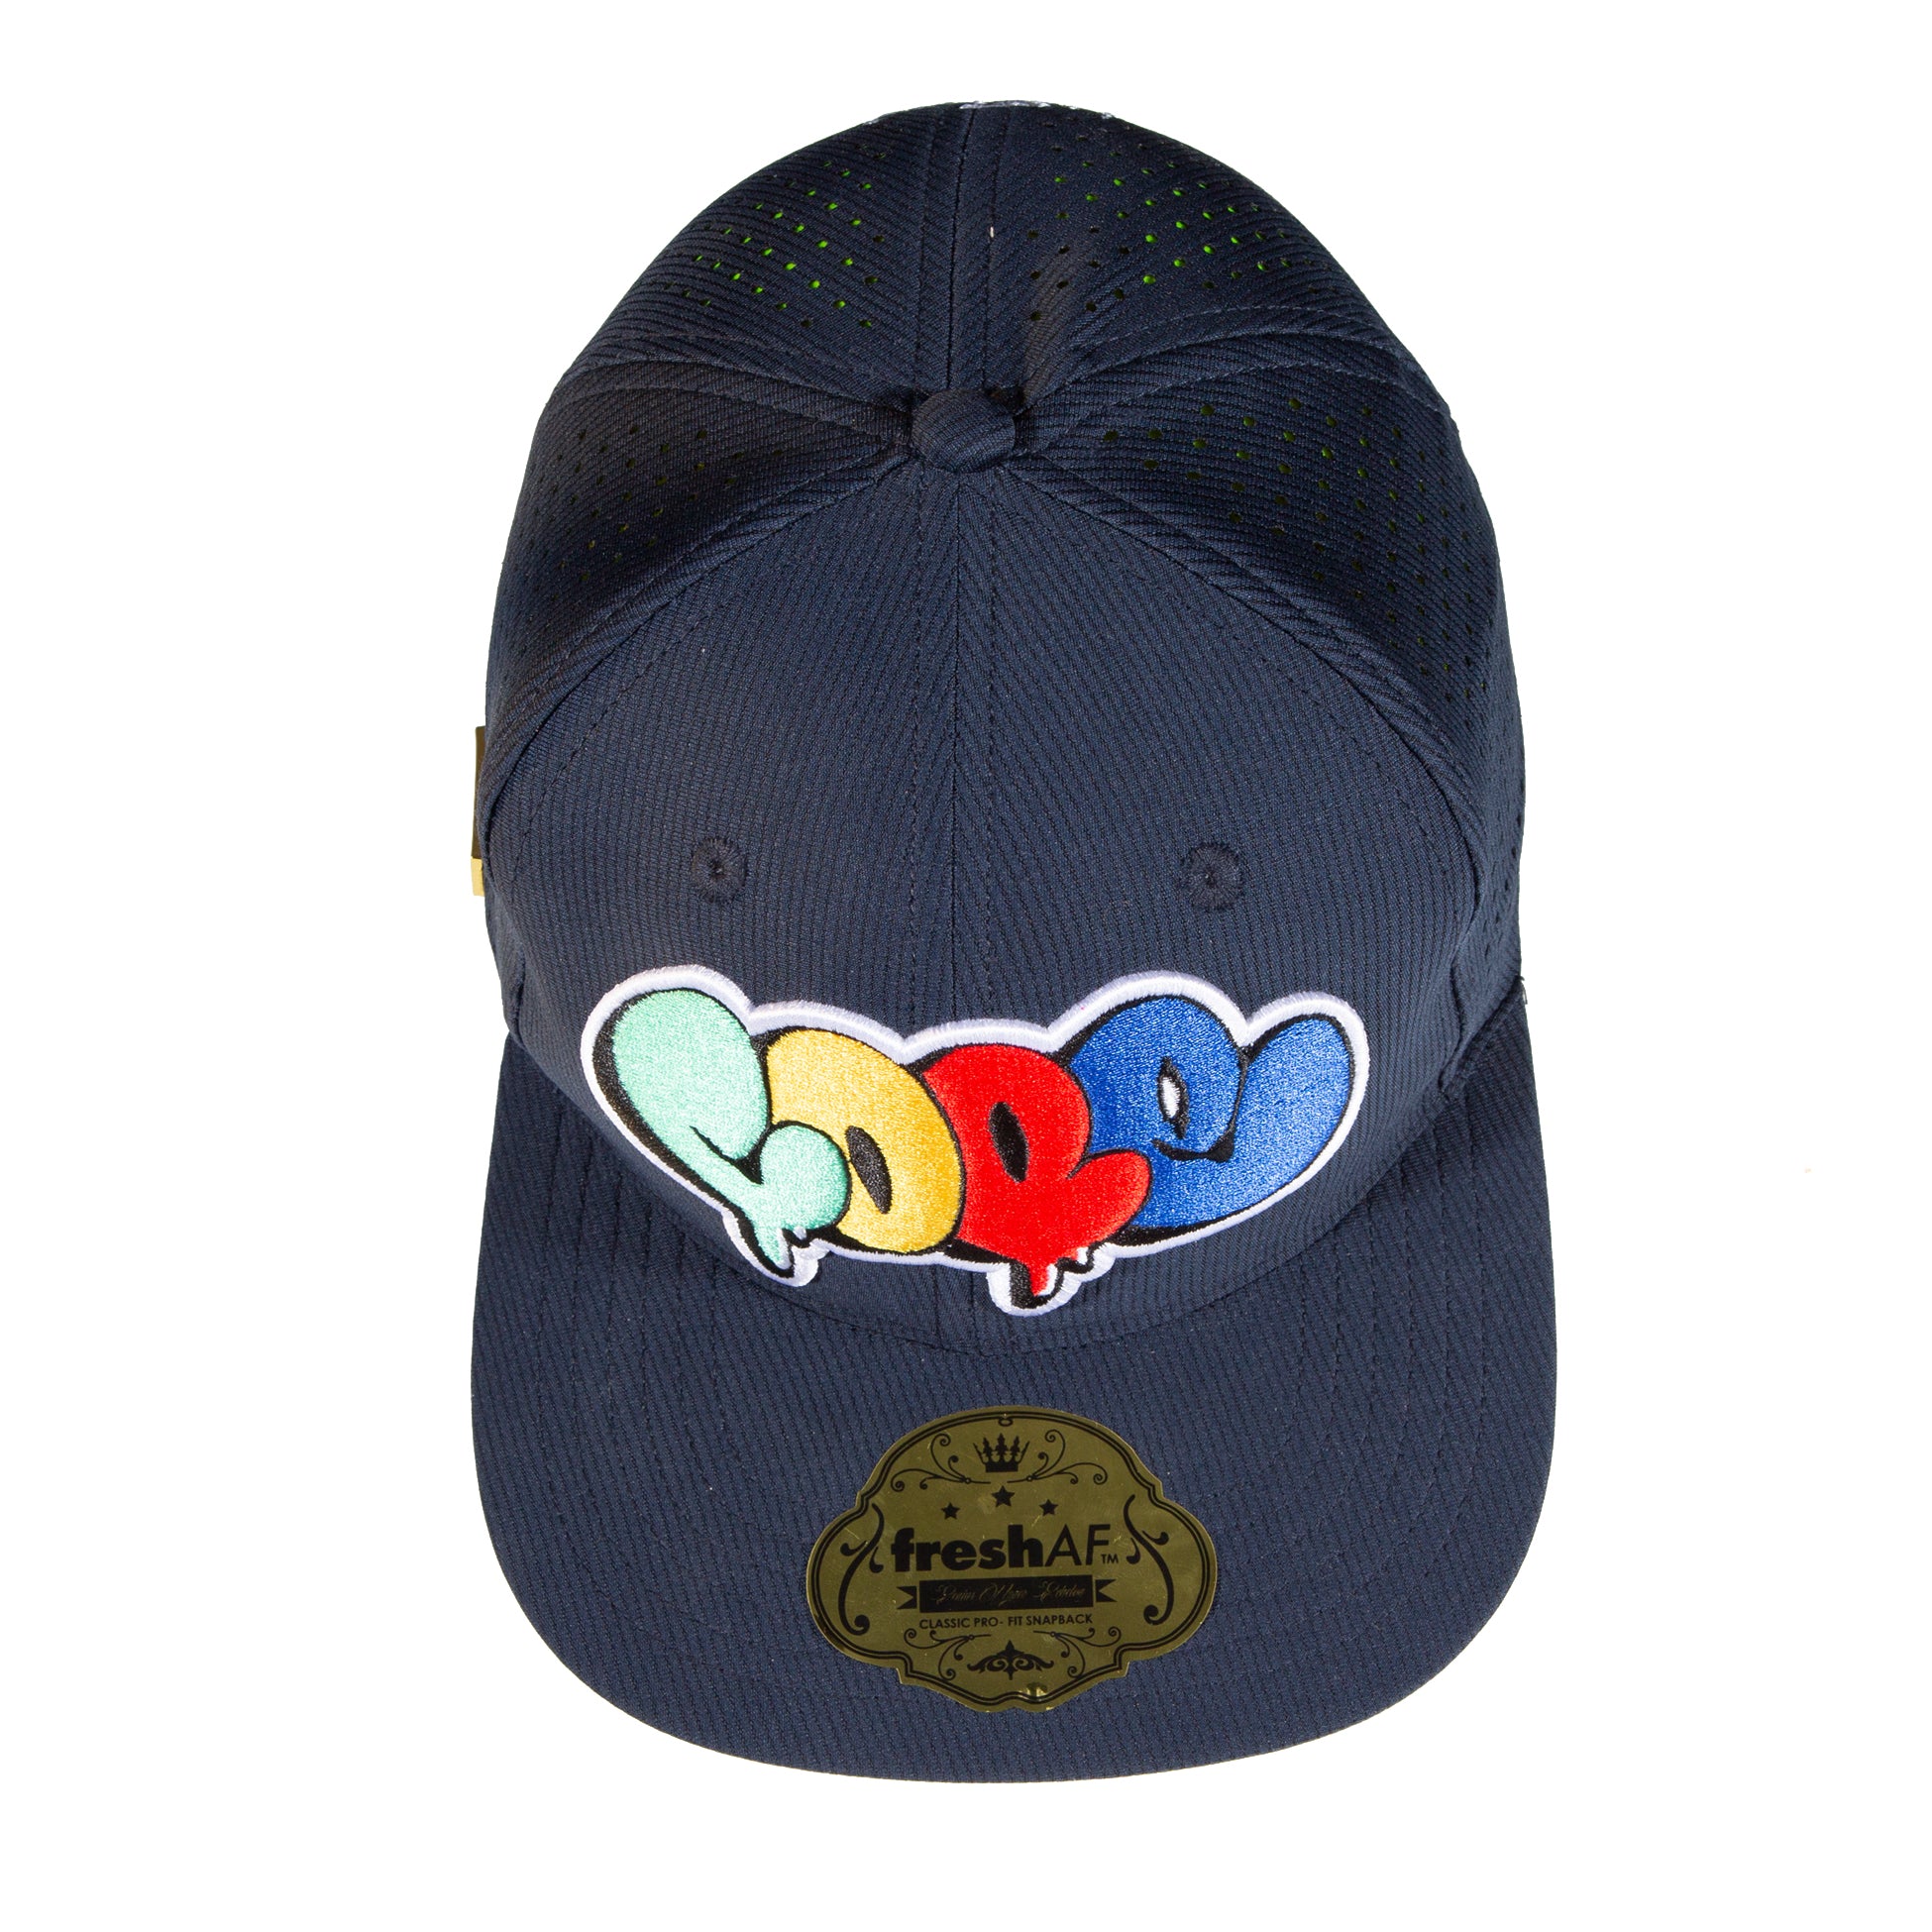 COPE 2- Nylon 3D - - AF Embroidery Brand – Mesh Cap Fresh Navy/Mutil-color